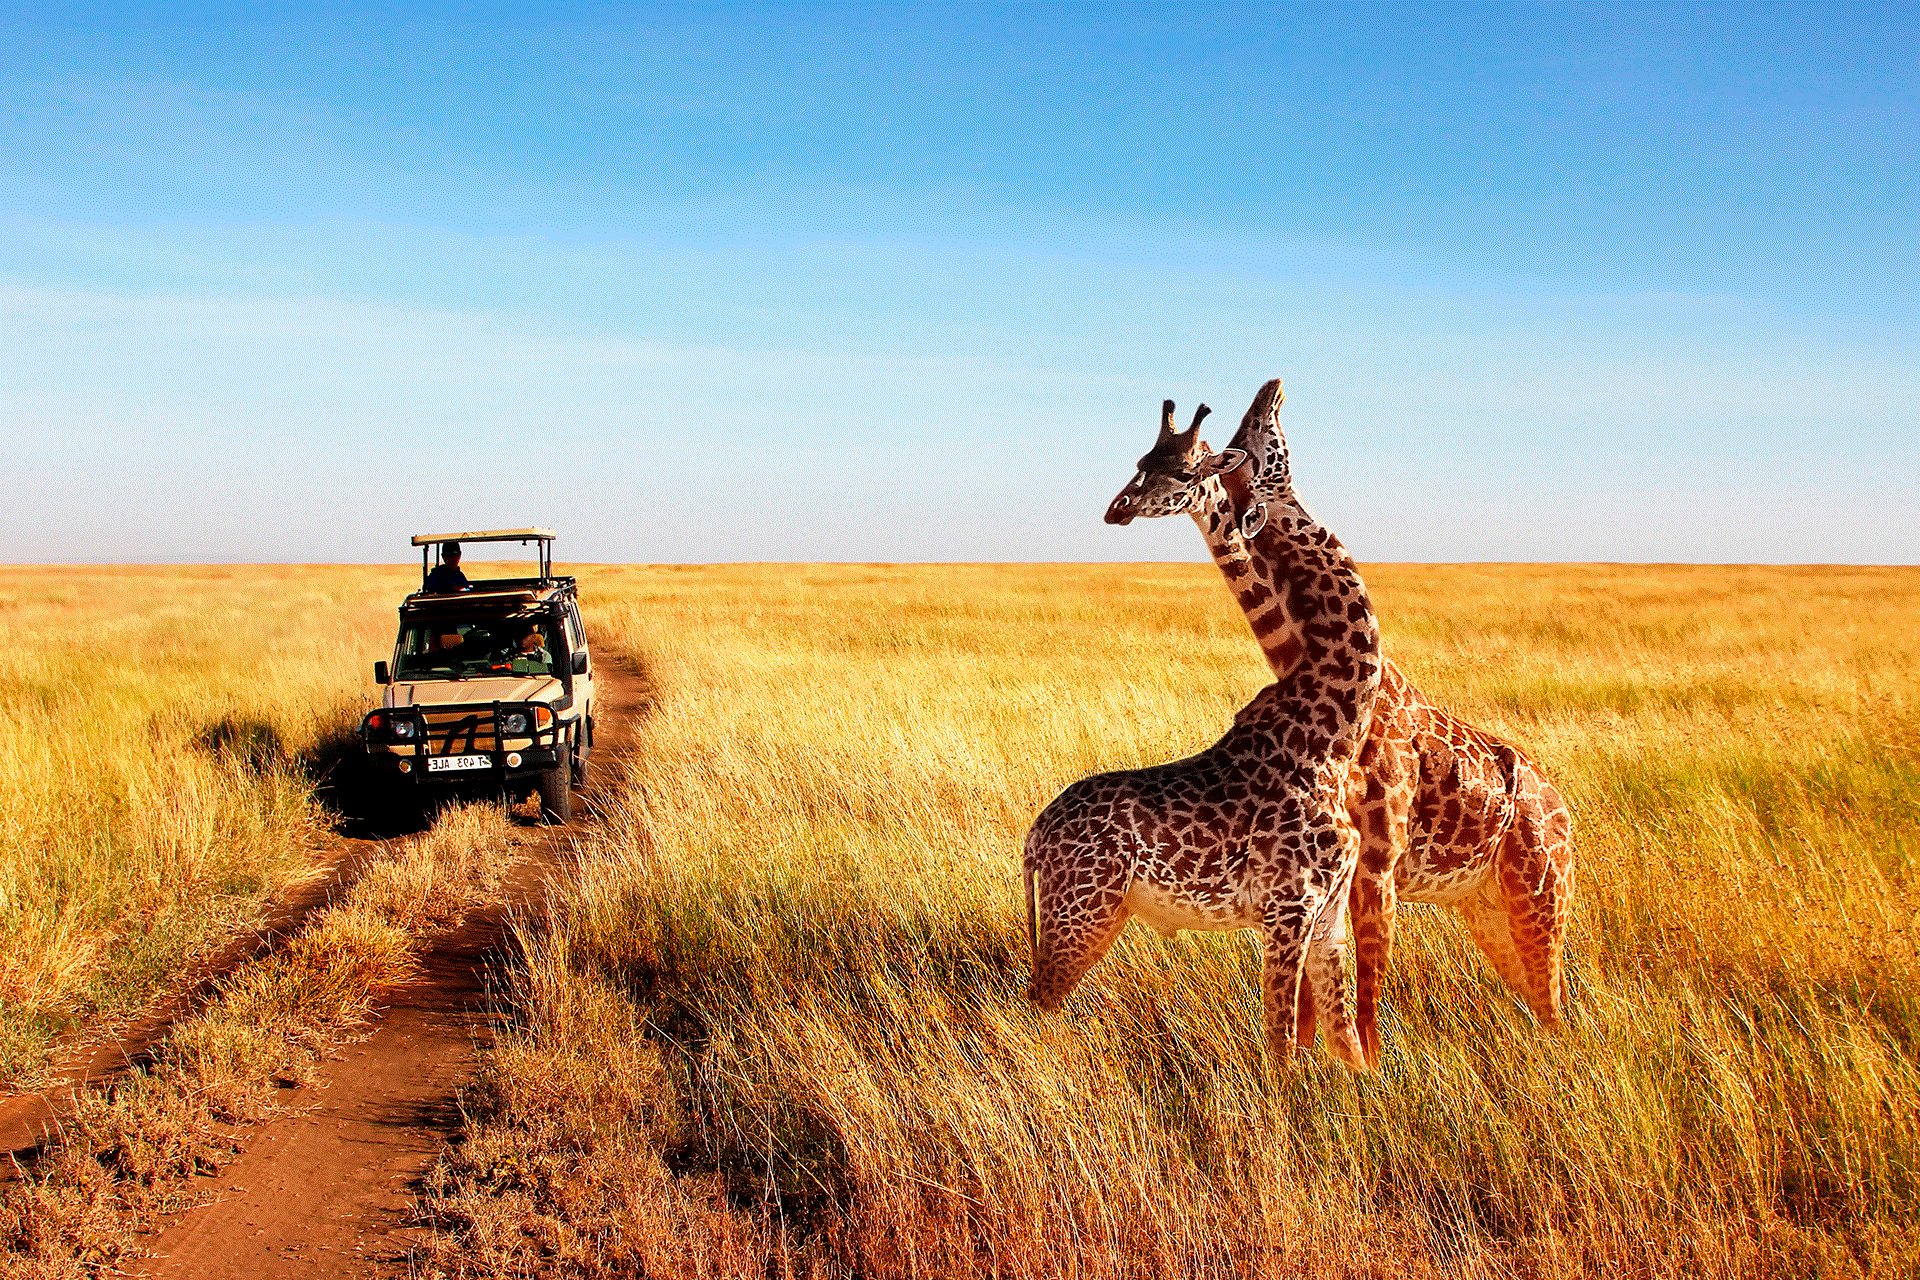 a group of travelers sighting giraffes from a safari vehicle